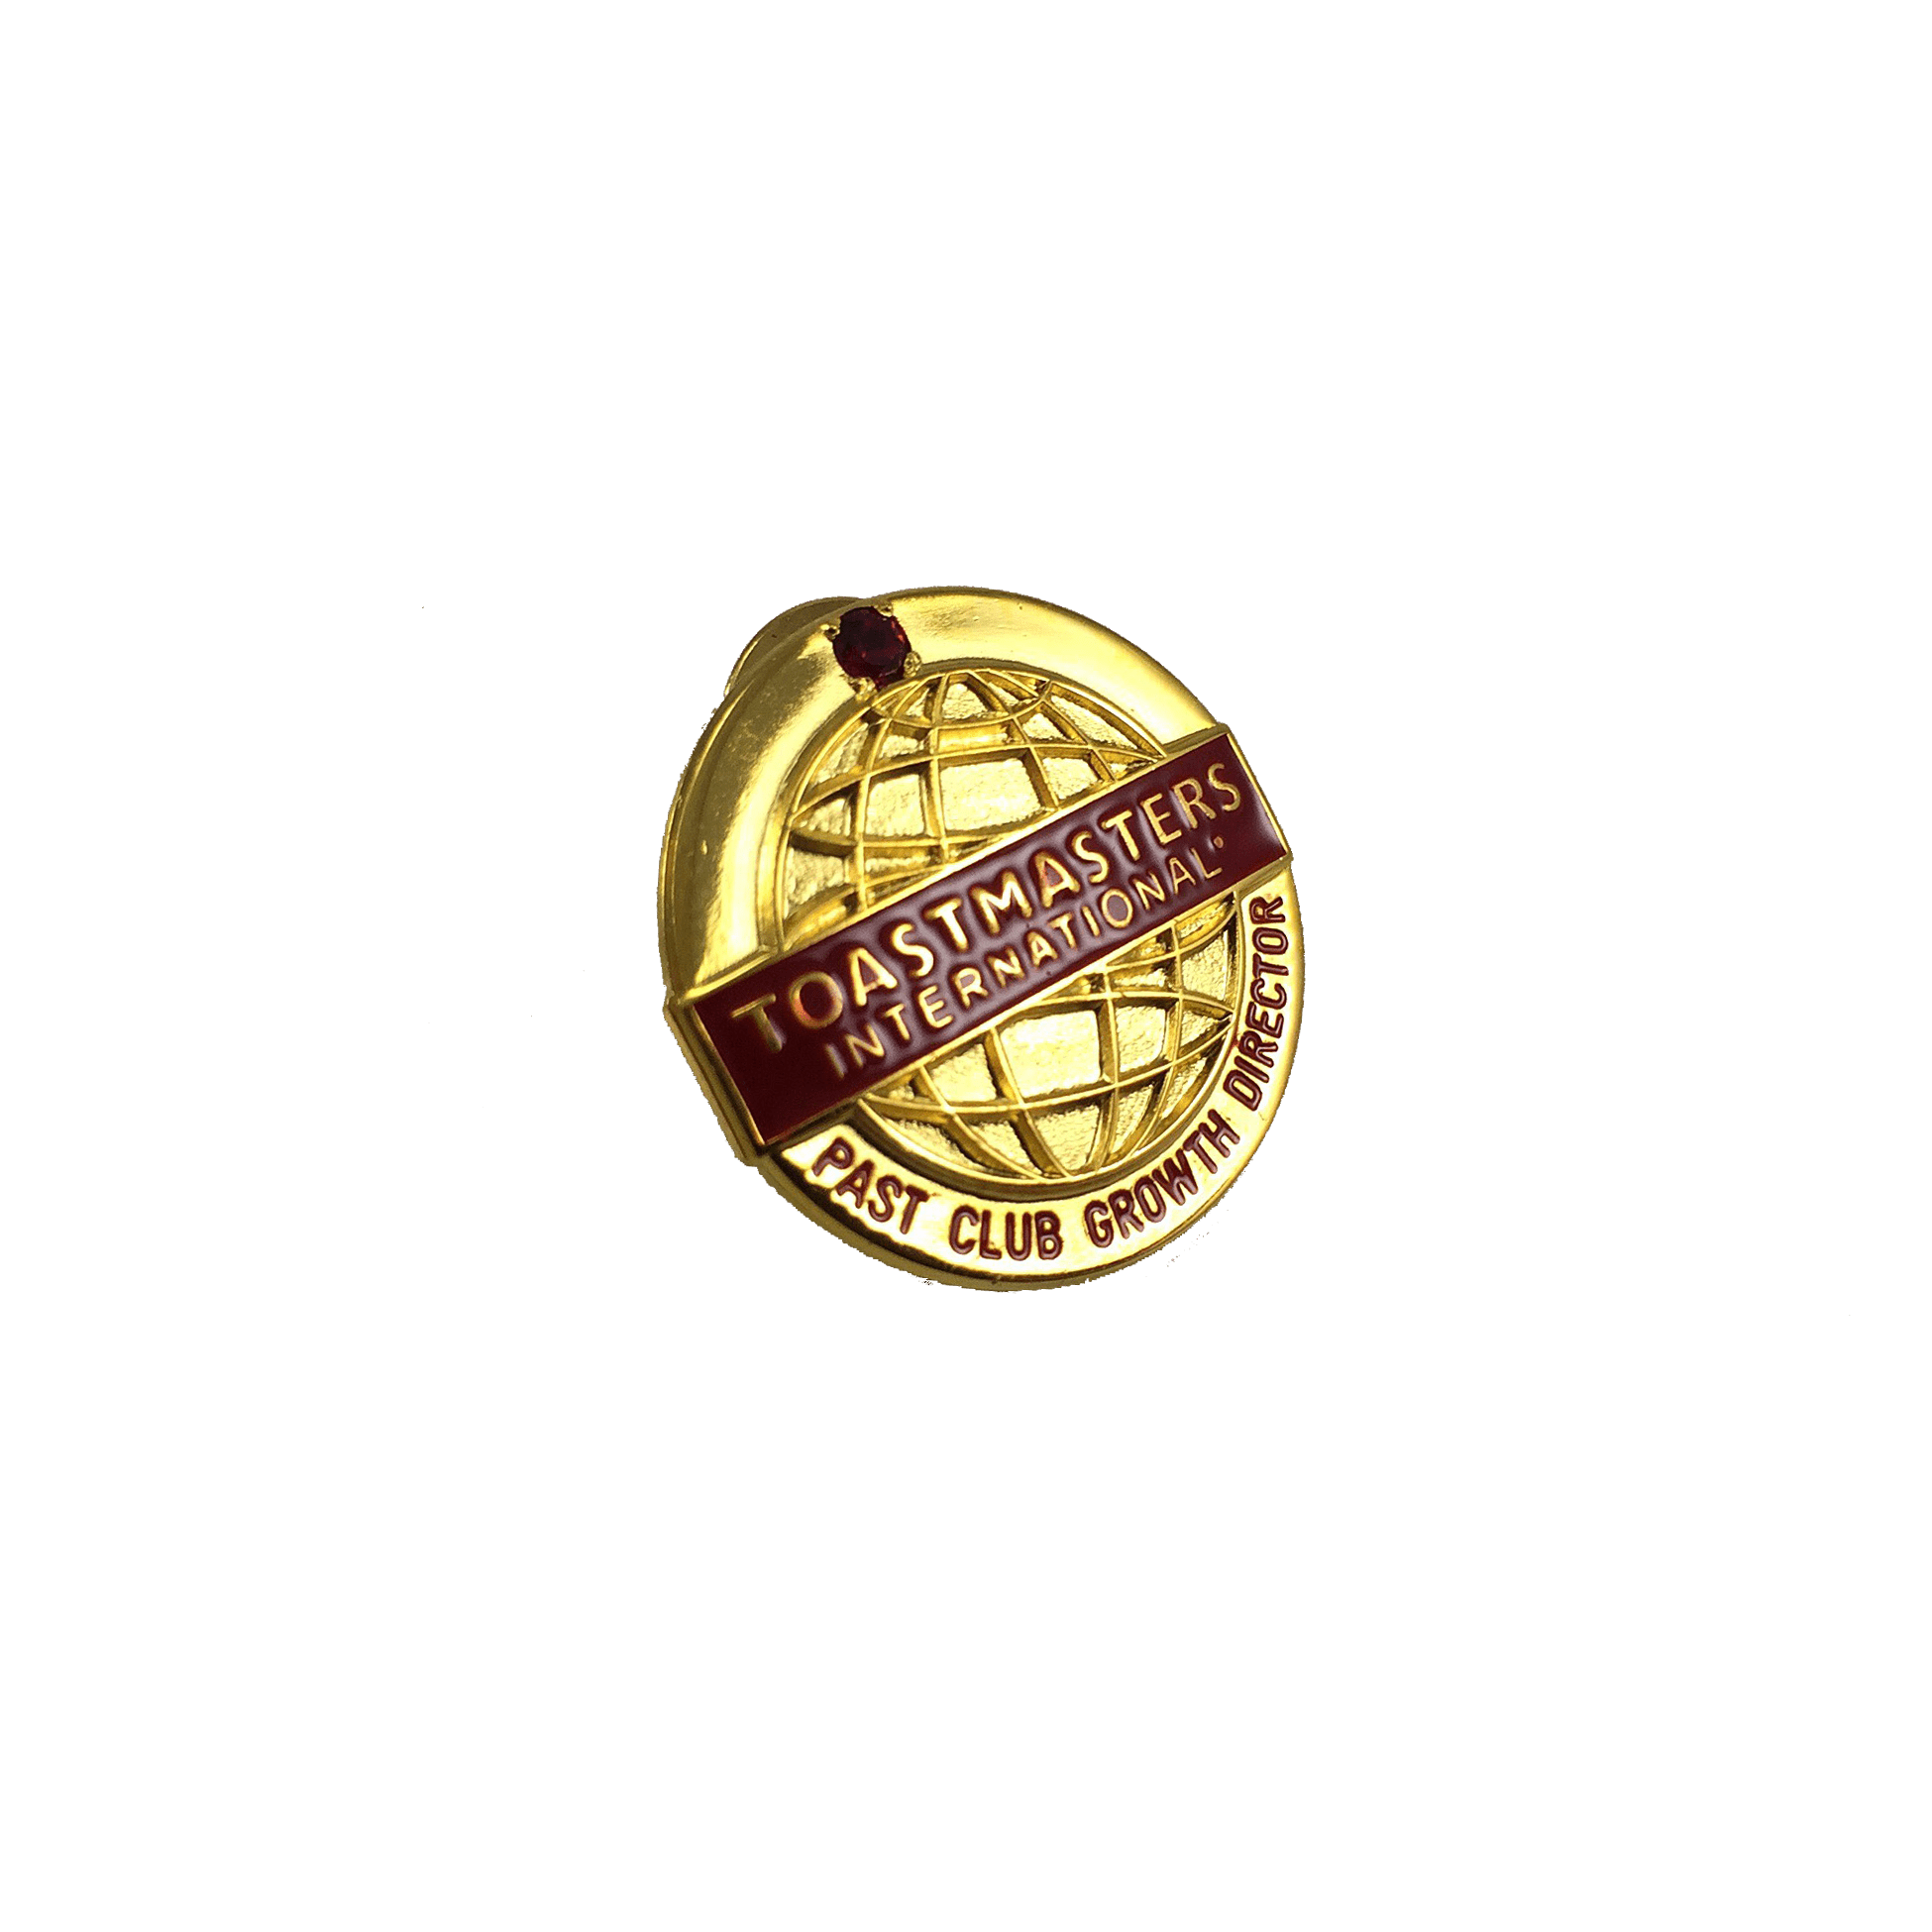 Past Club Growth Director Pin (with stone)